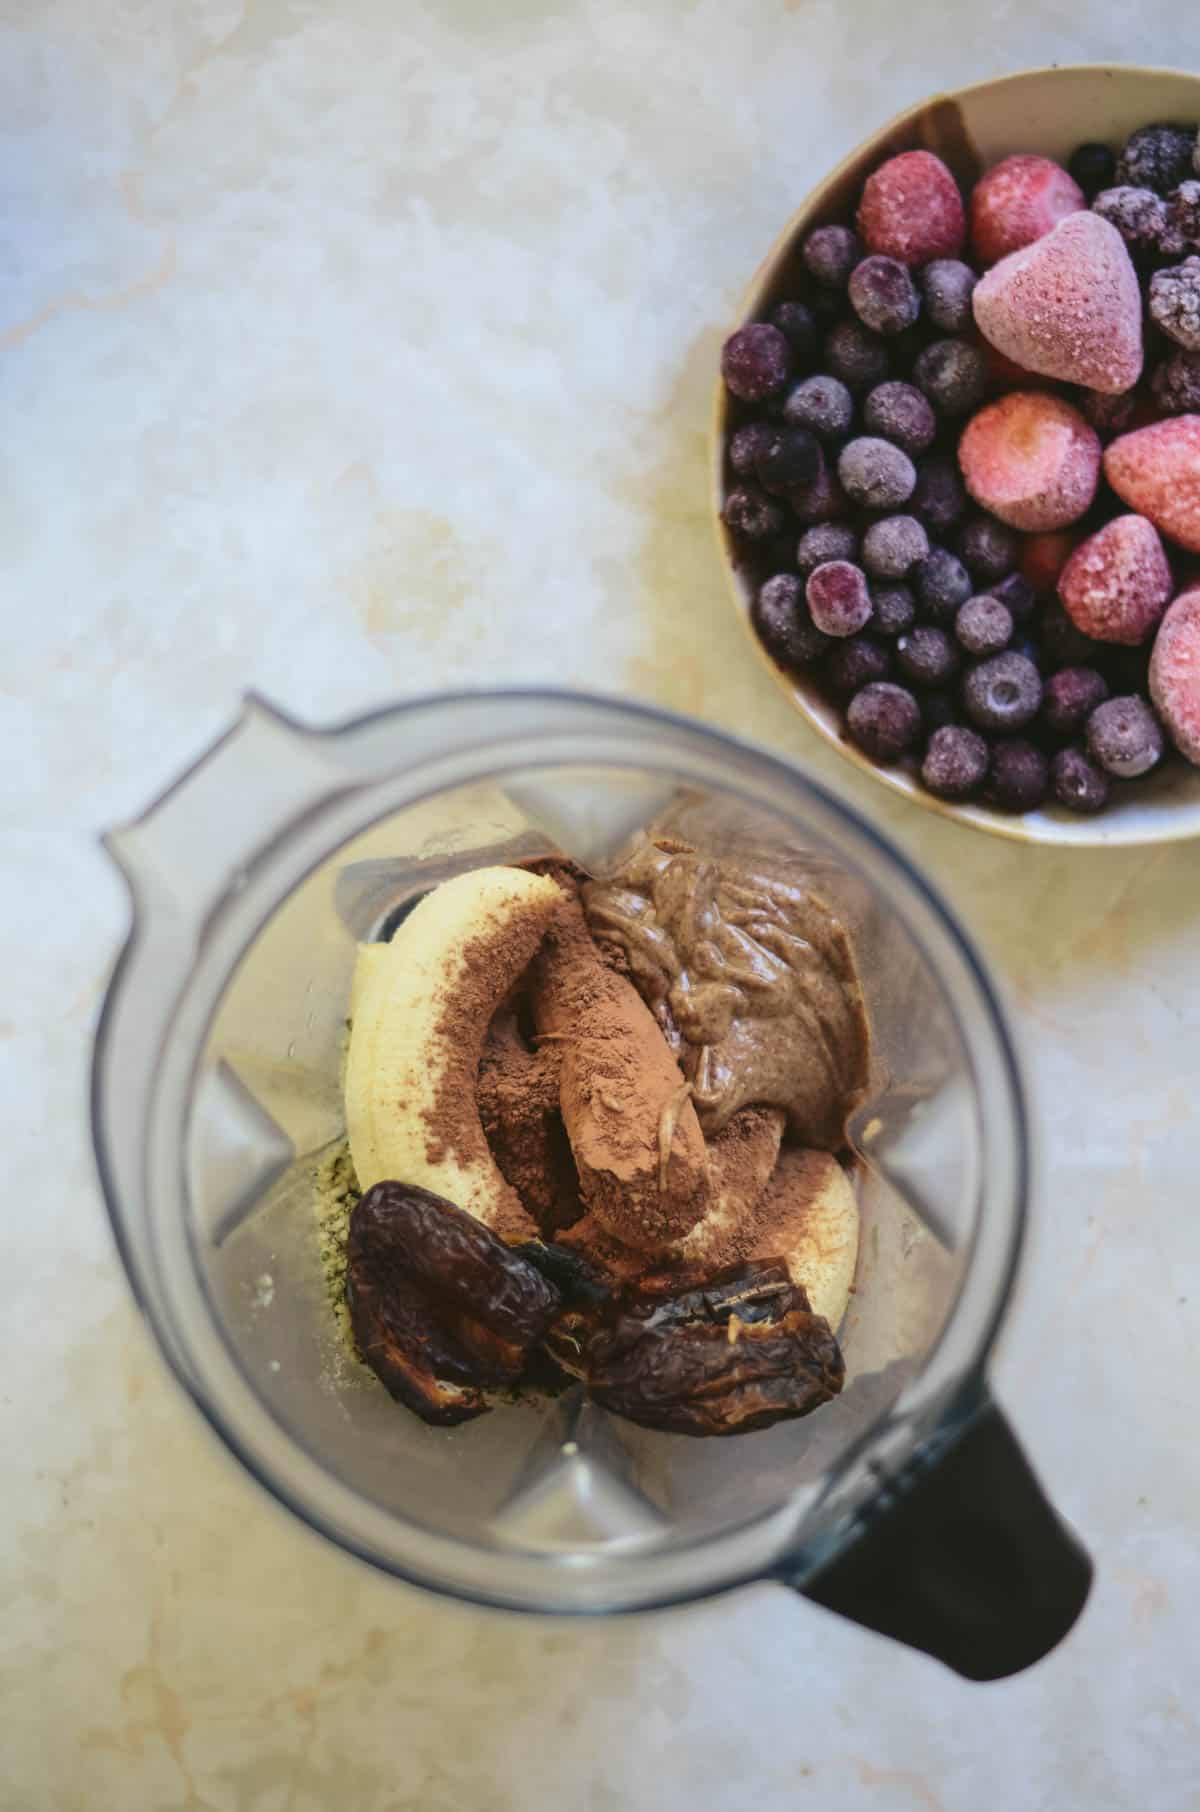 Almond butter, cocoa powder, banana, hemp hearts, dates, in the blender container with the frozen berries in a pottery bowl beside.